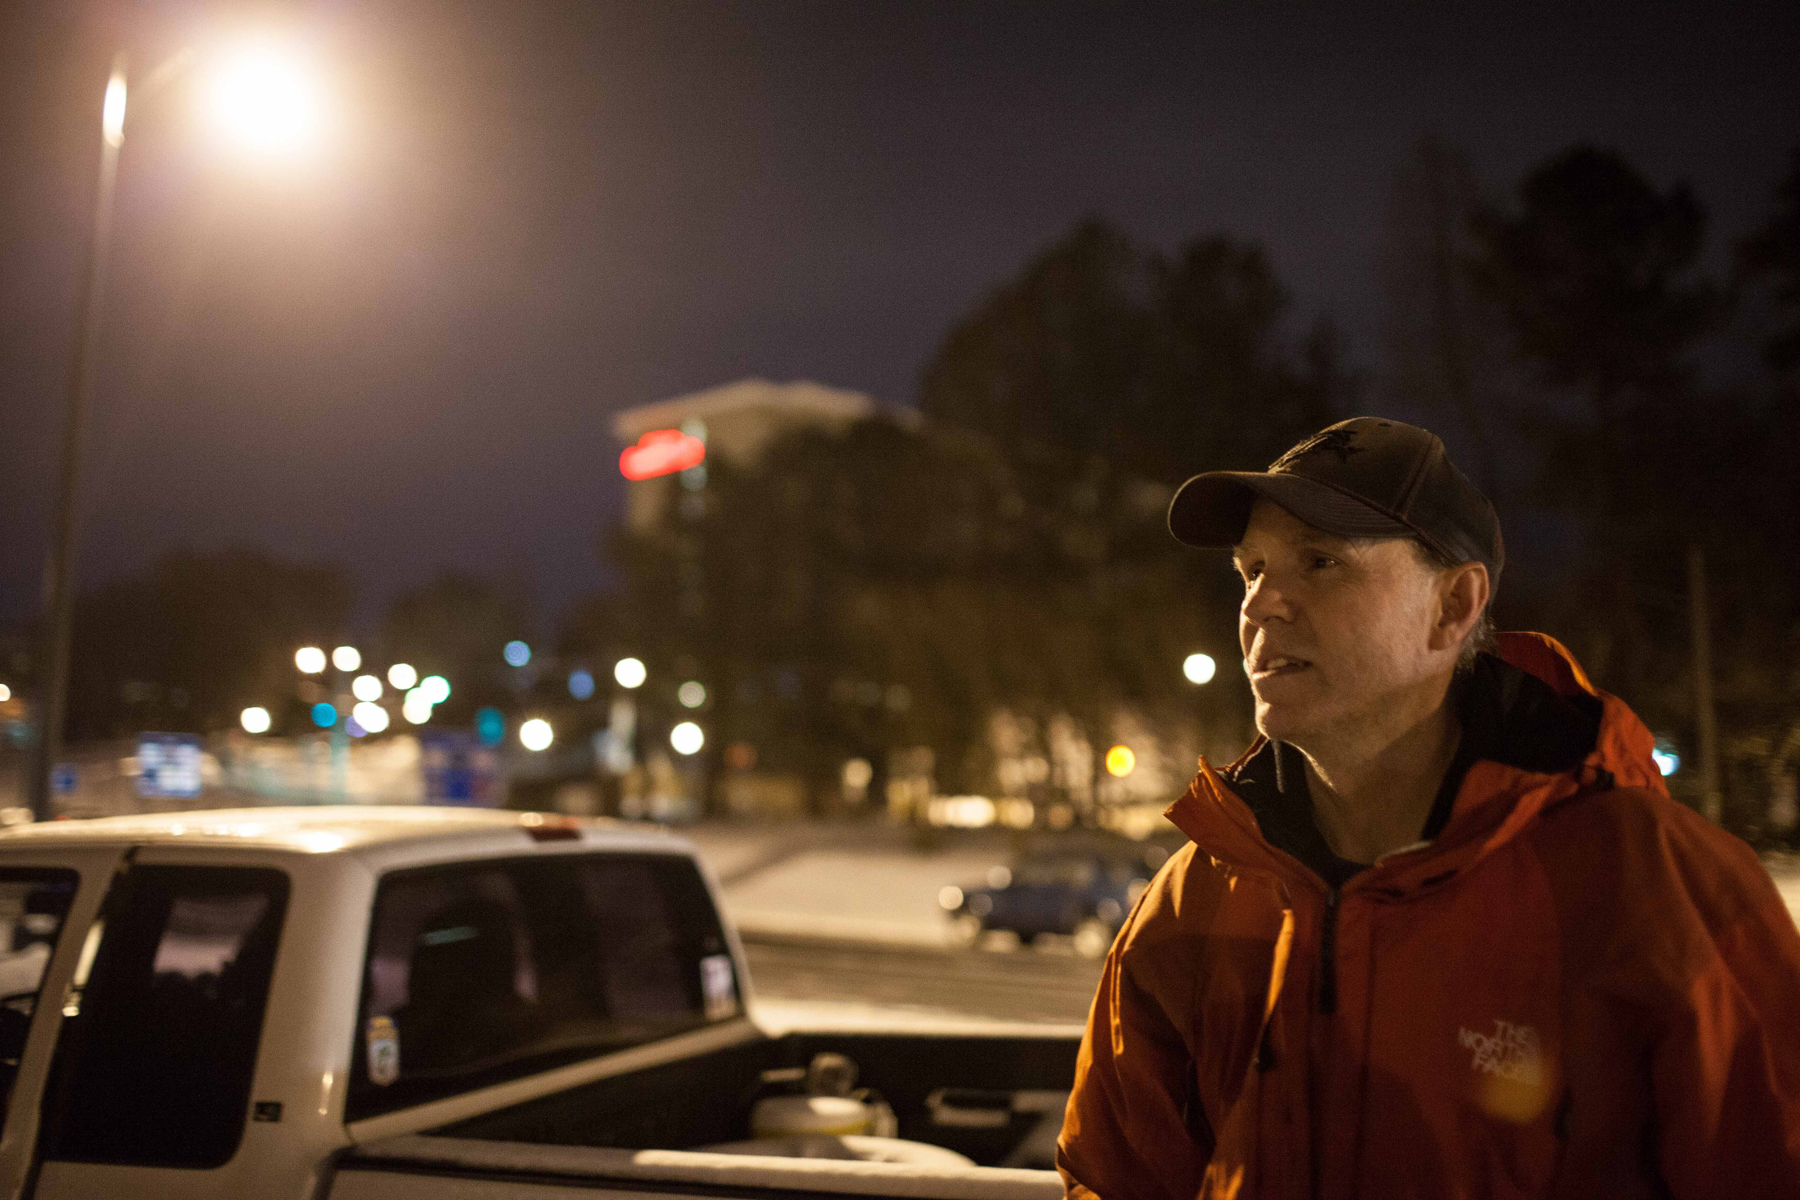 Jeff Brown stands outside of his truck that he slept in Tuesday night after being stranded on Interstate 285, early Wednesday, Jan. 29, 2014, in Dunwoody, Ga.